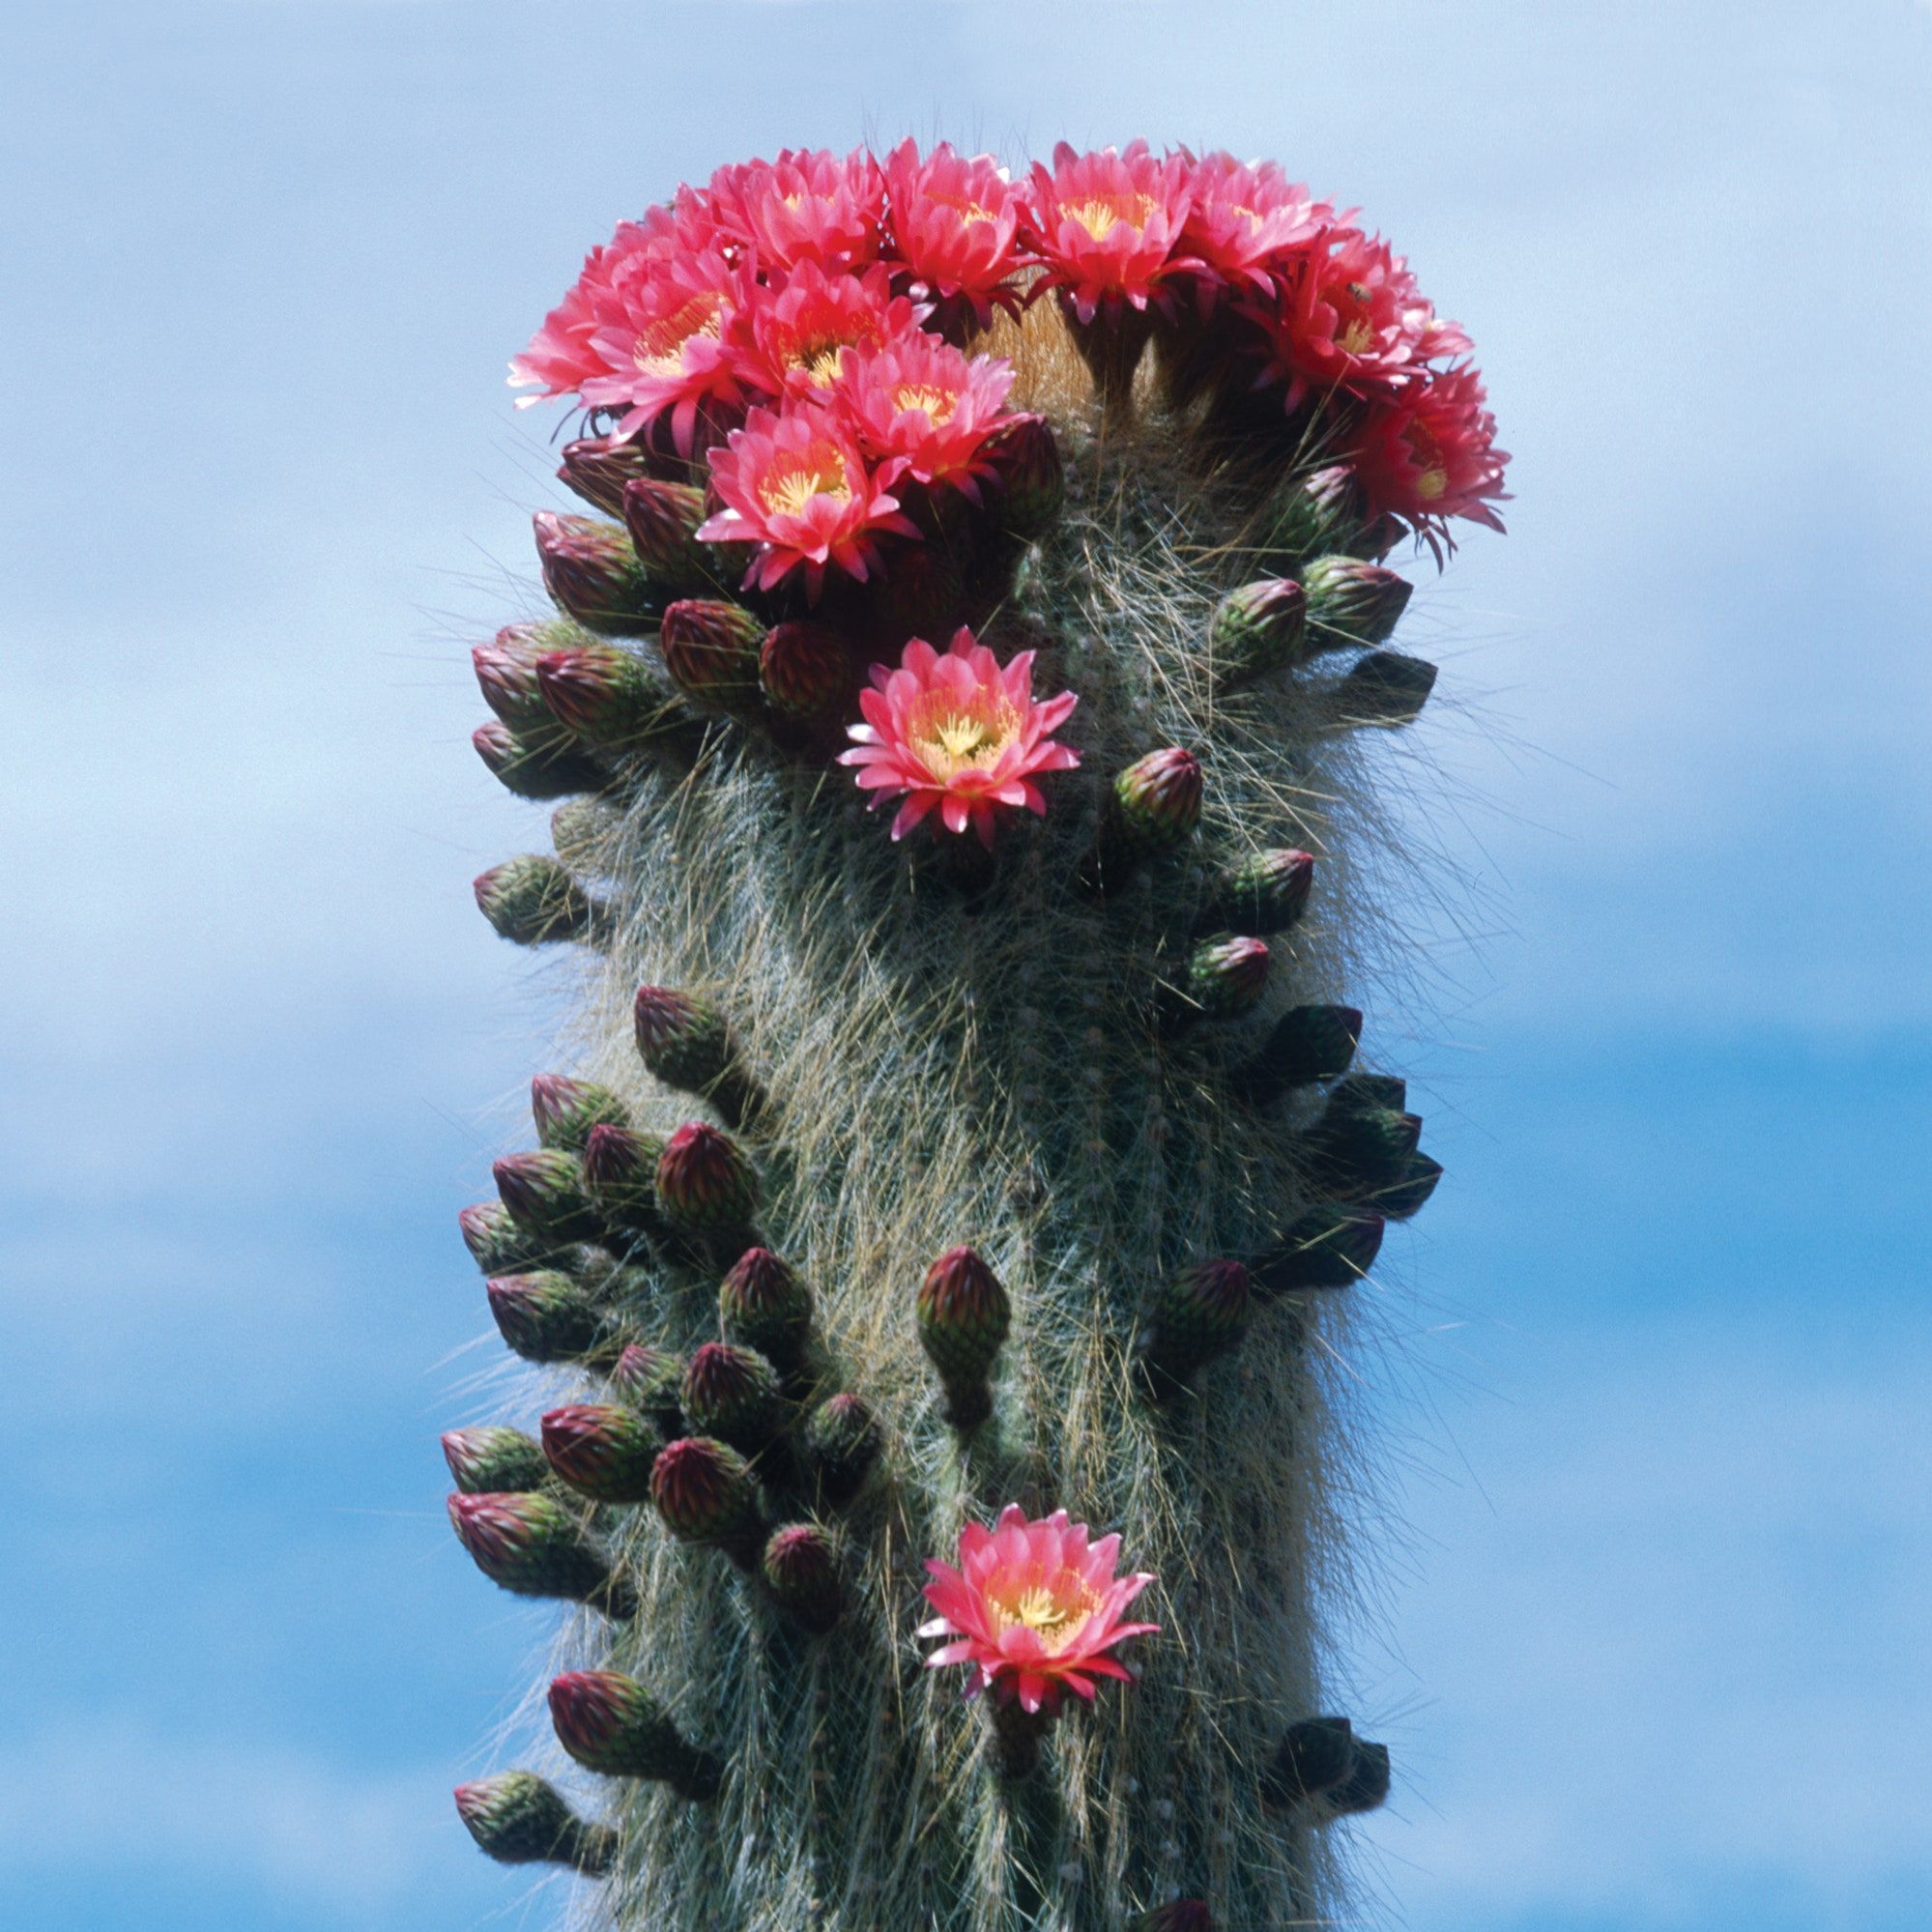 The Strange Wonders of Cactuses, the Plant of Our Times. The New Yorker